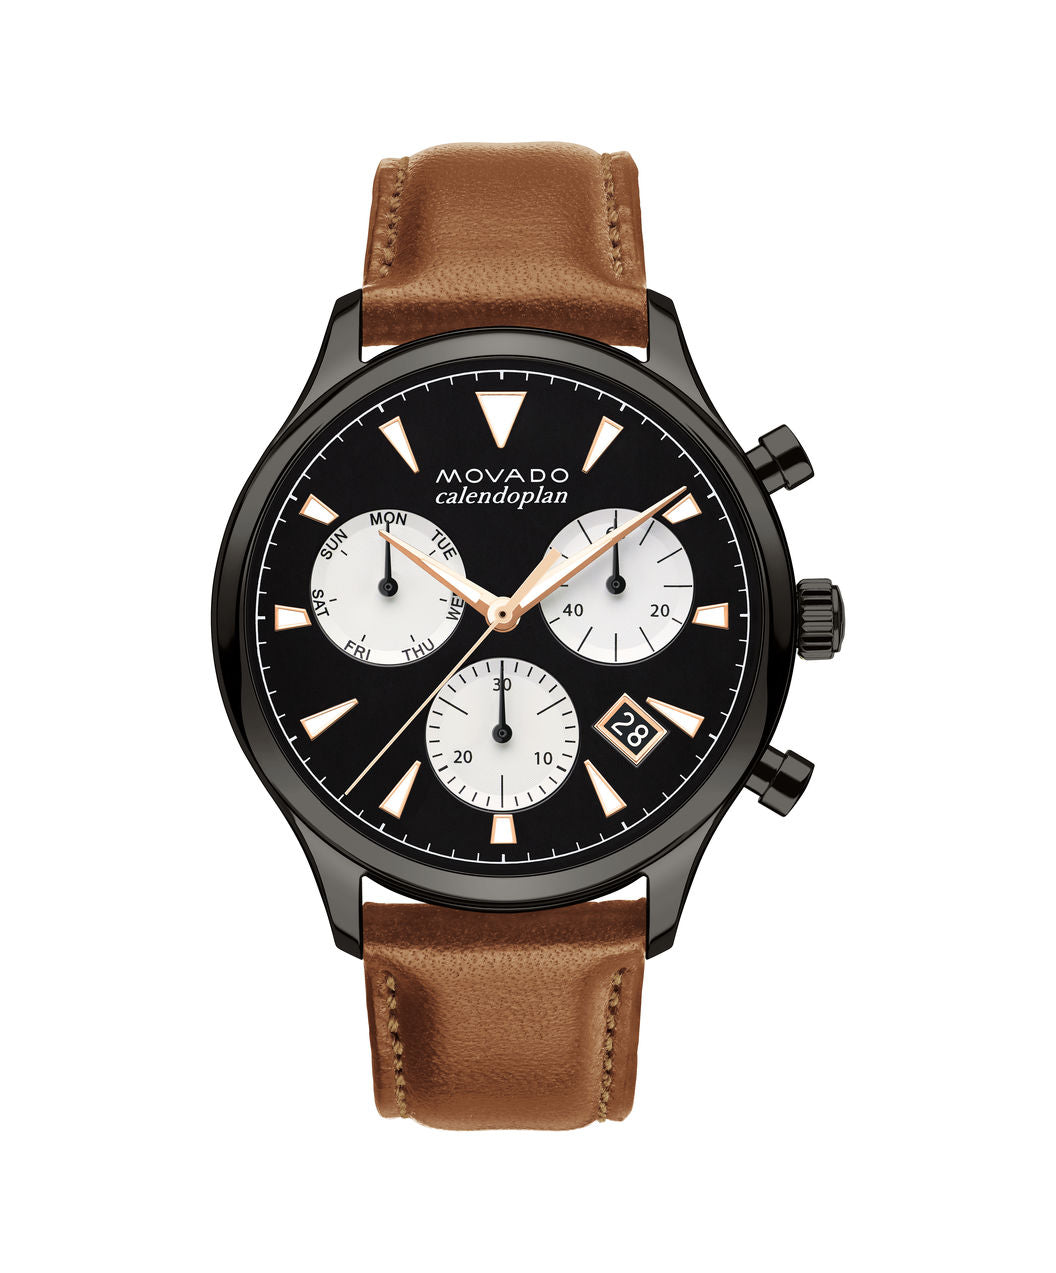 Movado Group Launches Calvin Klein Spring-Summer 2022 Watch and